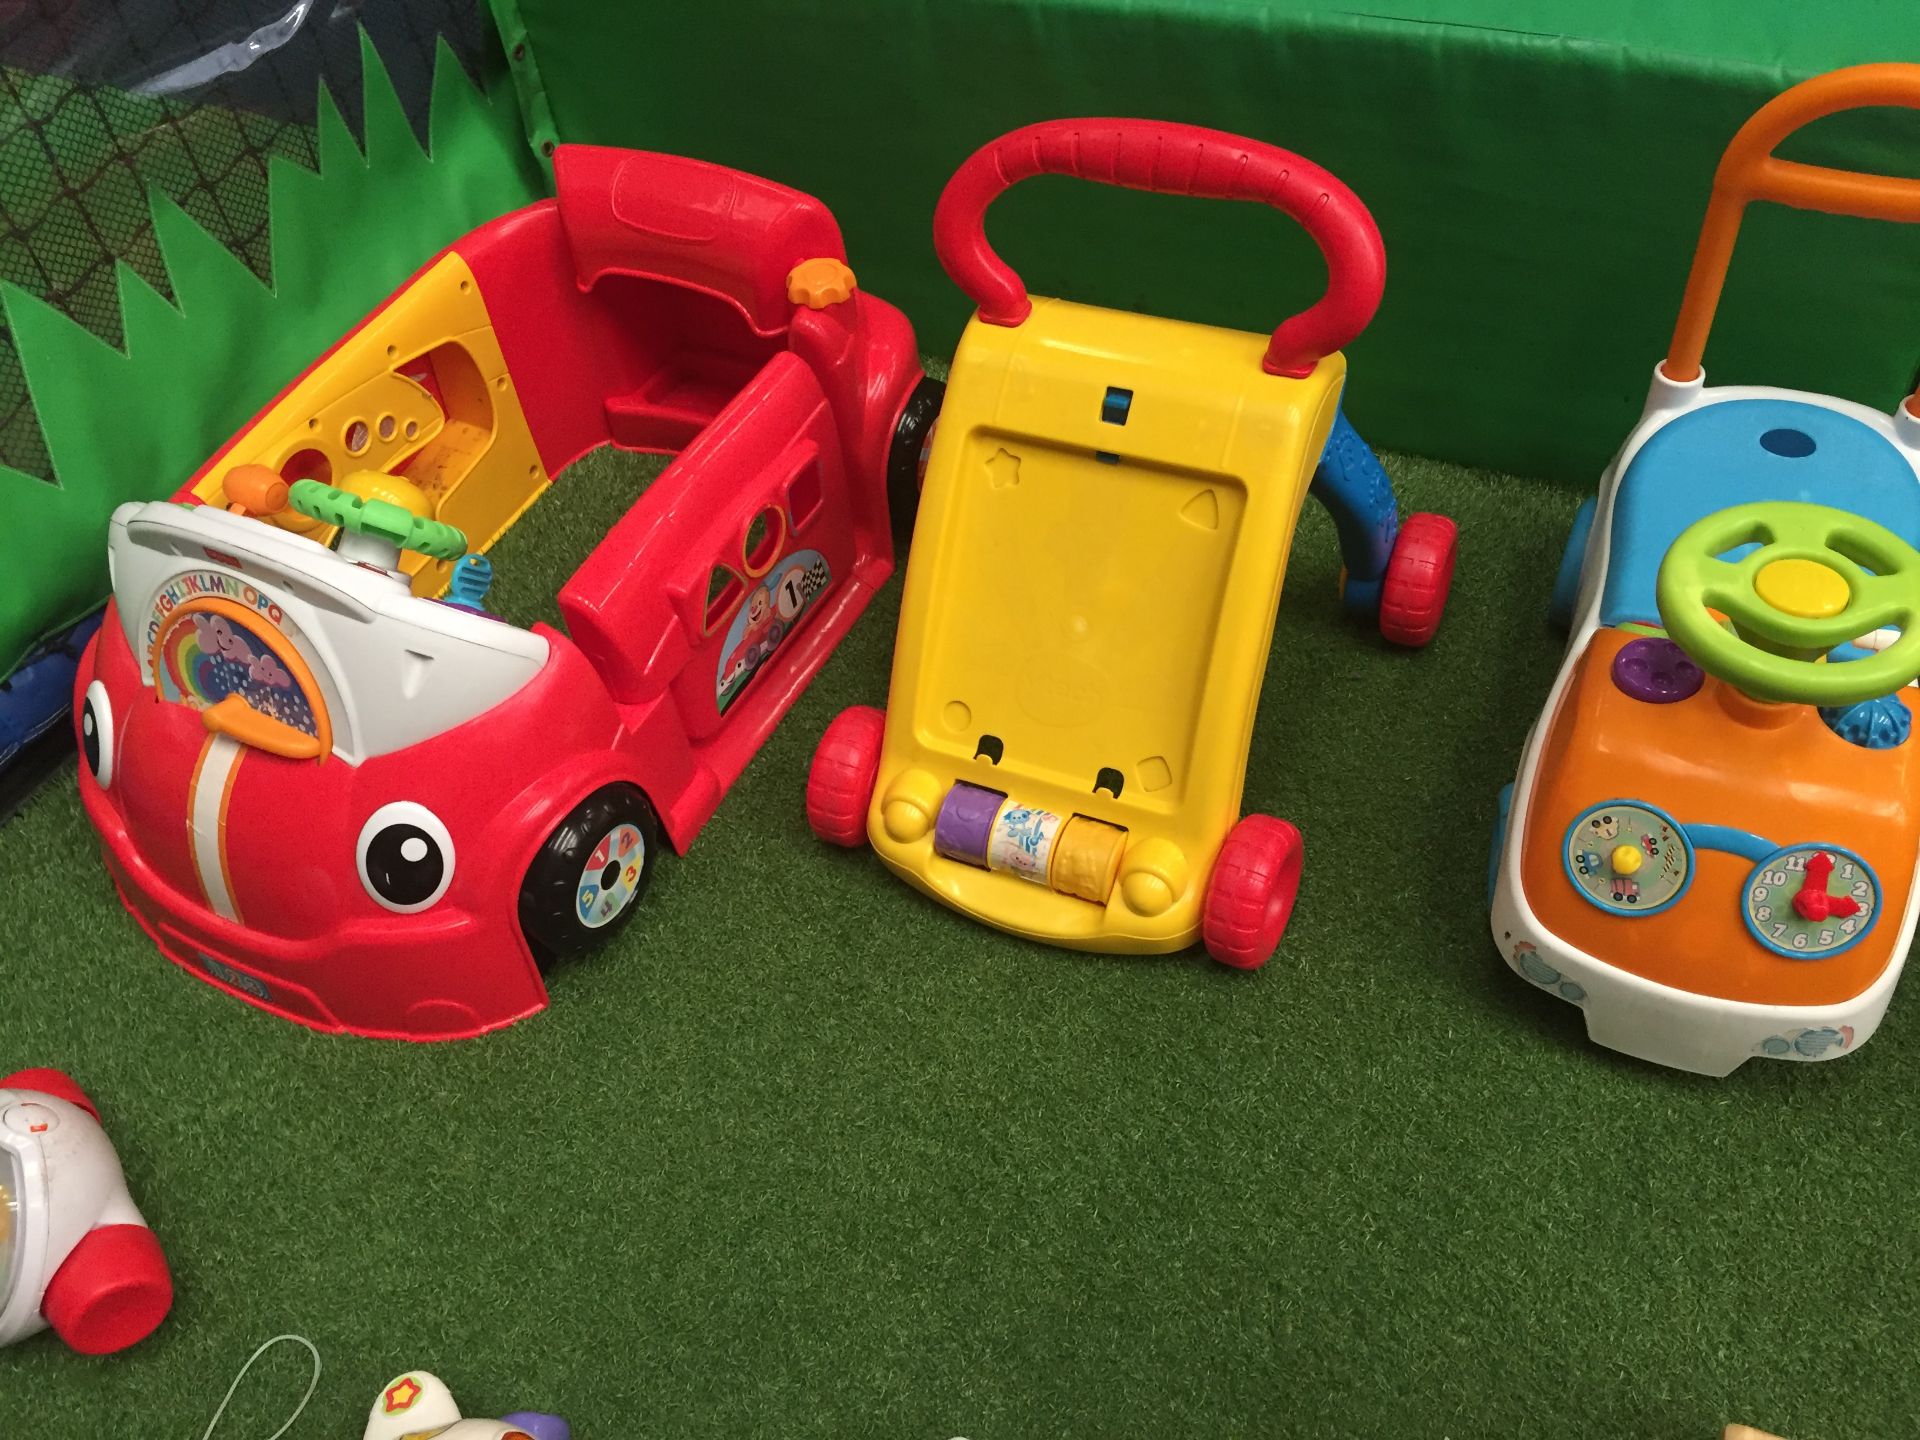 Toddler Play Area - Image 7 of 12